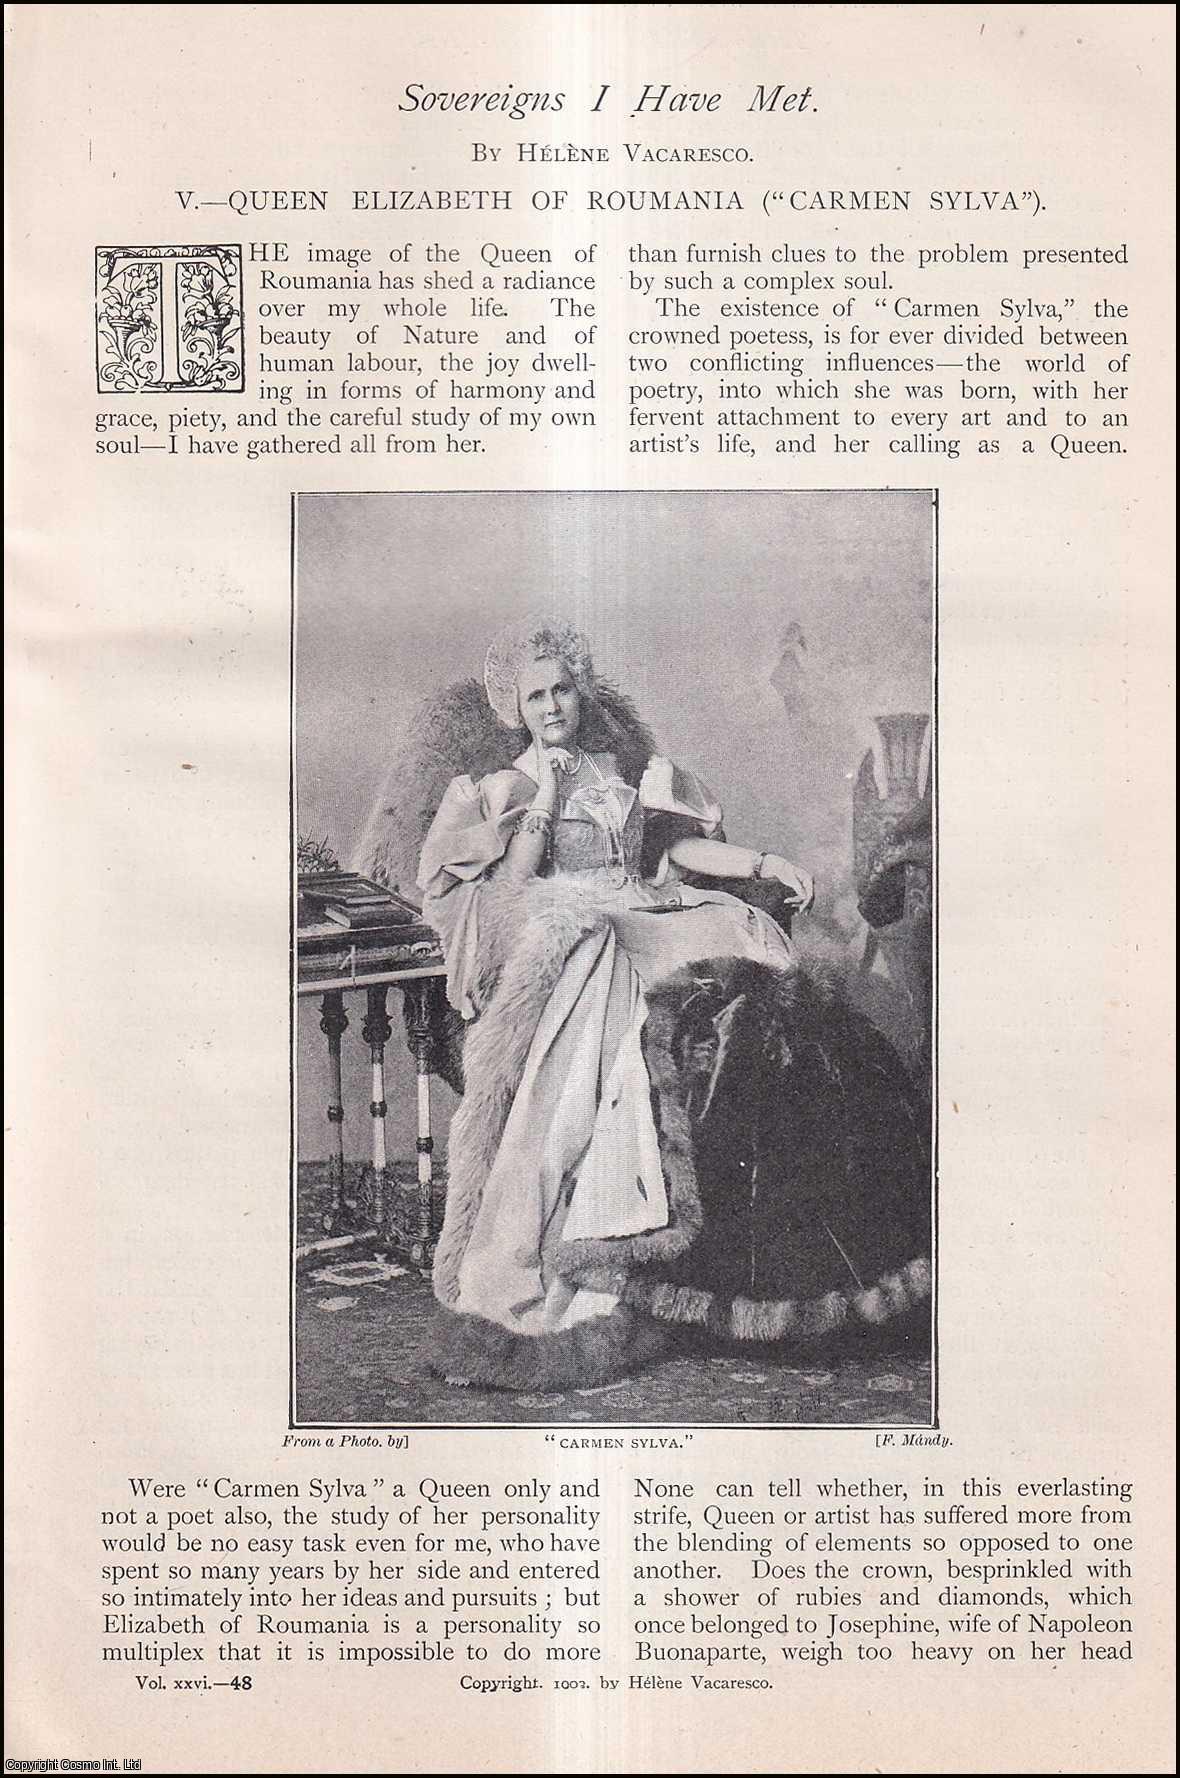 Helene Vacaresco - Queen Elizabeth of Roumania (Carmen Sylva). Sovereigns I Have Met. An uncommon original article from The Strand Magazine, 1903.